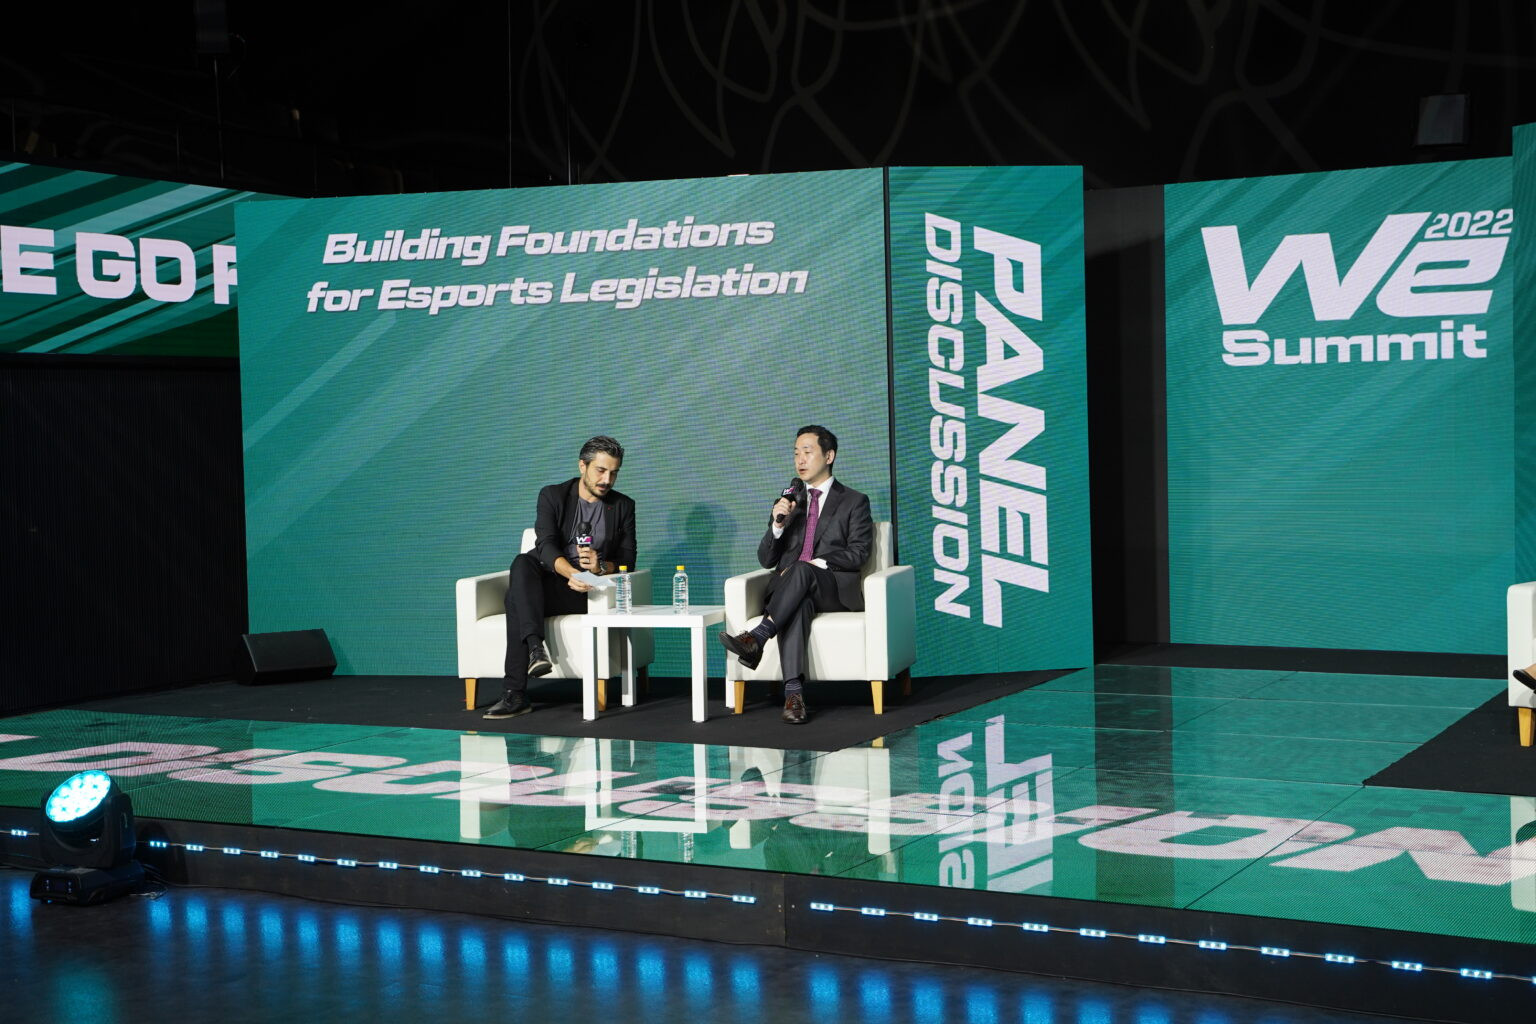 IESF President Vlad Marinescu, left, was one of the key speakers at the two-day World Esports Summit that has concluded in Busan, South Korea ©IESF